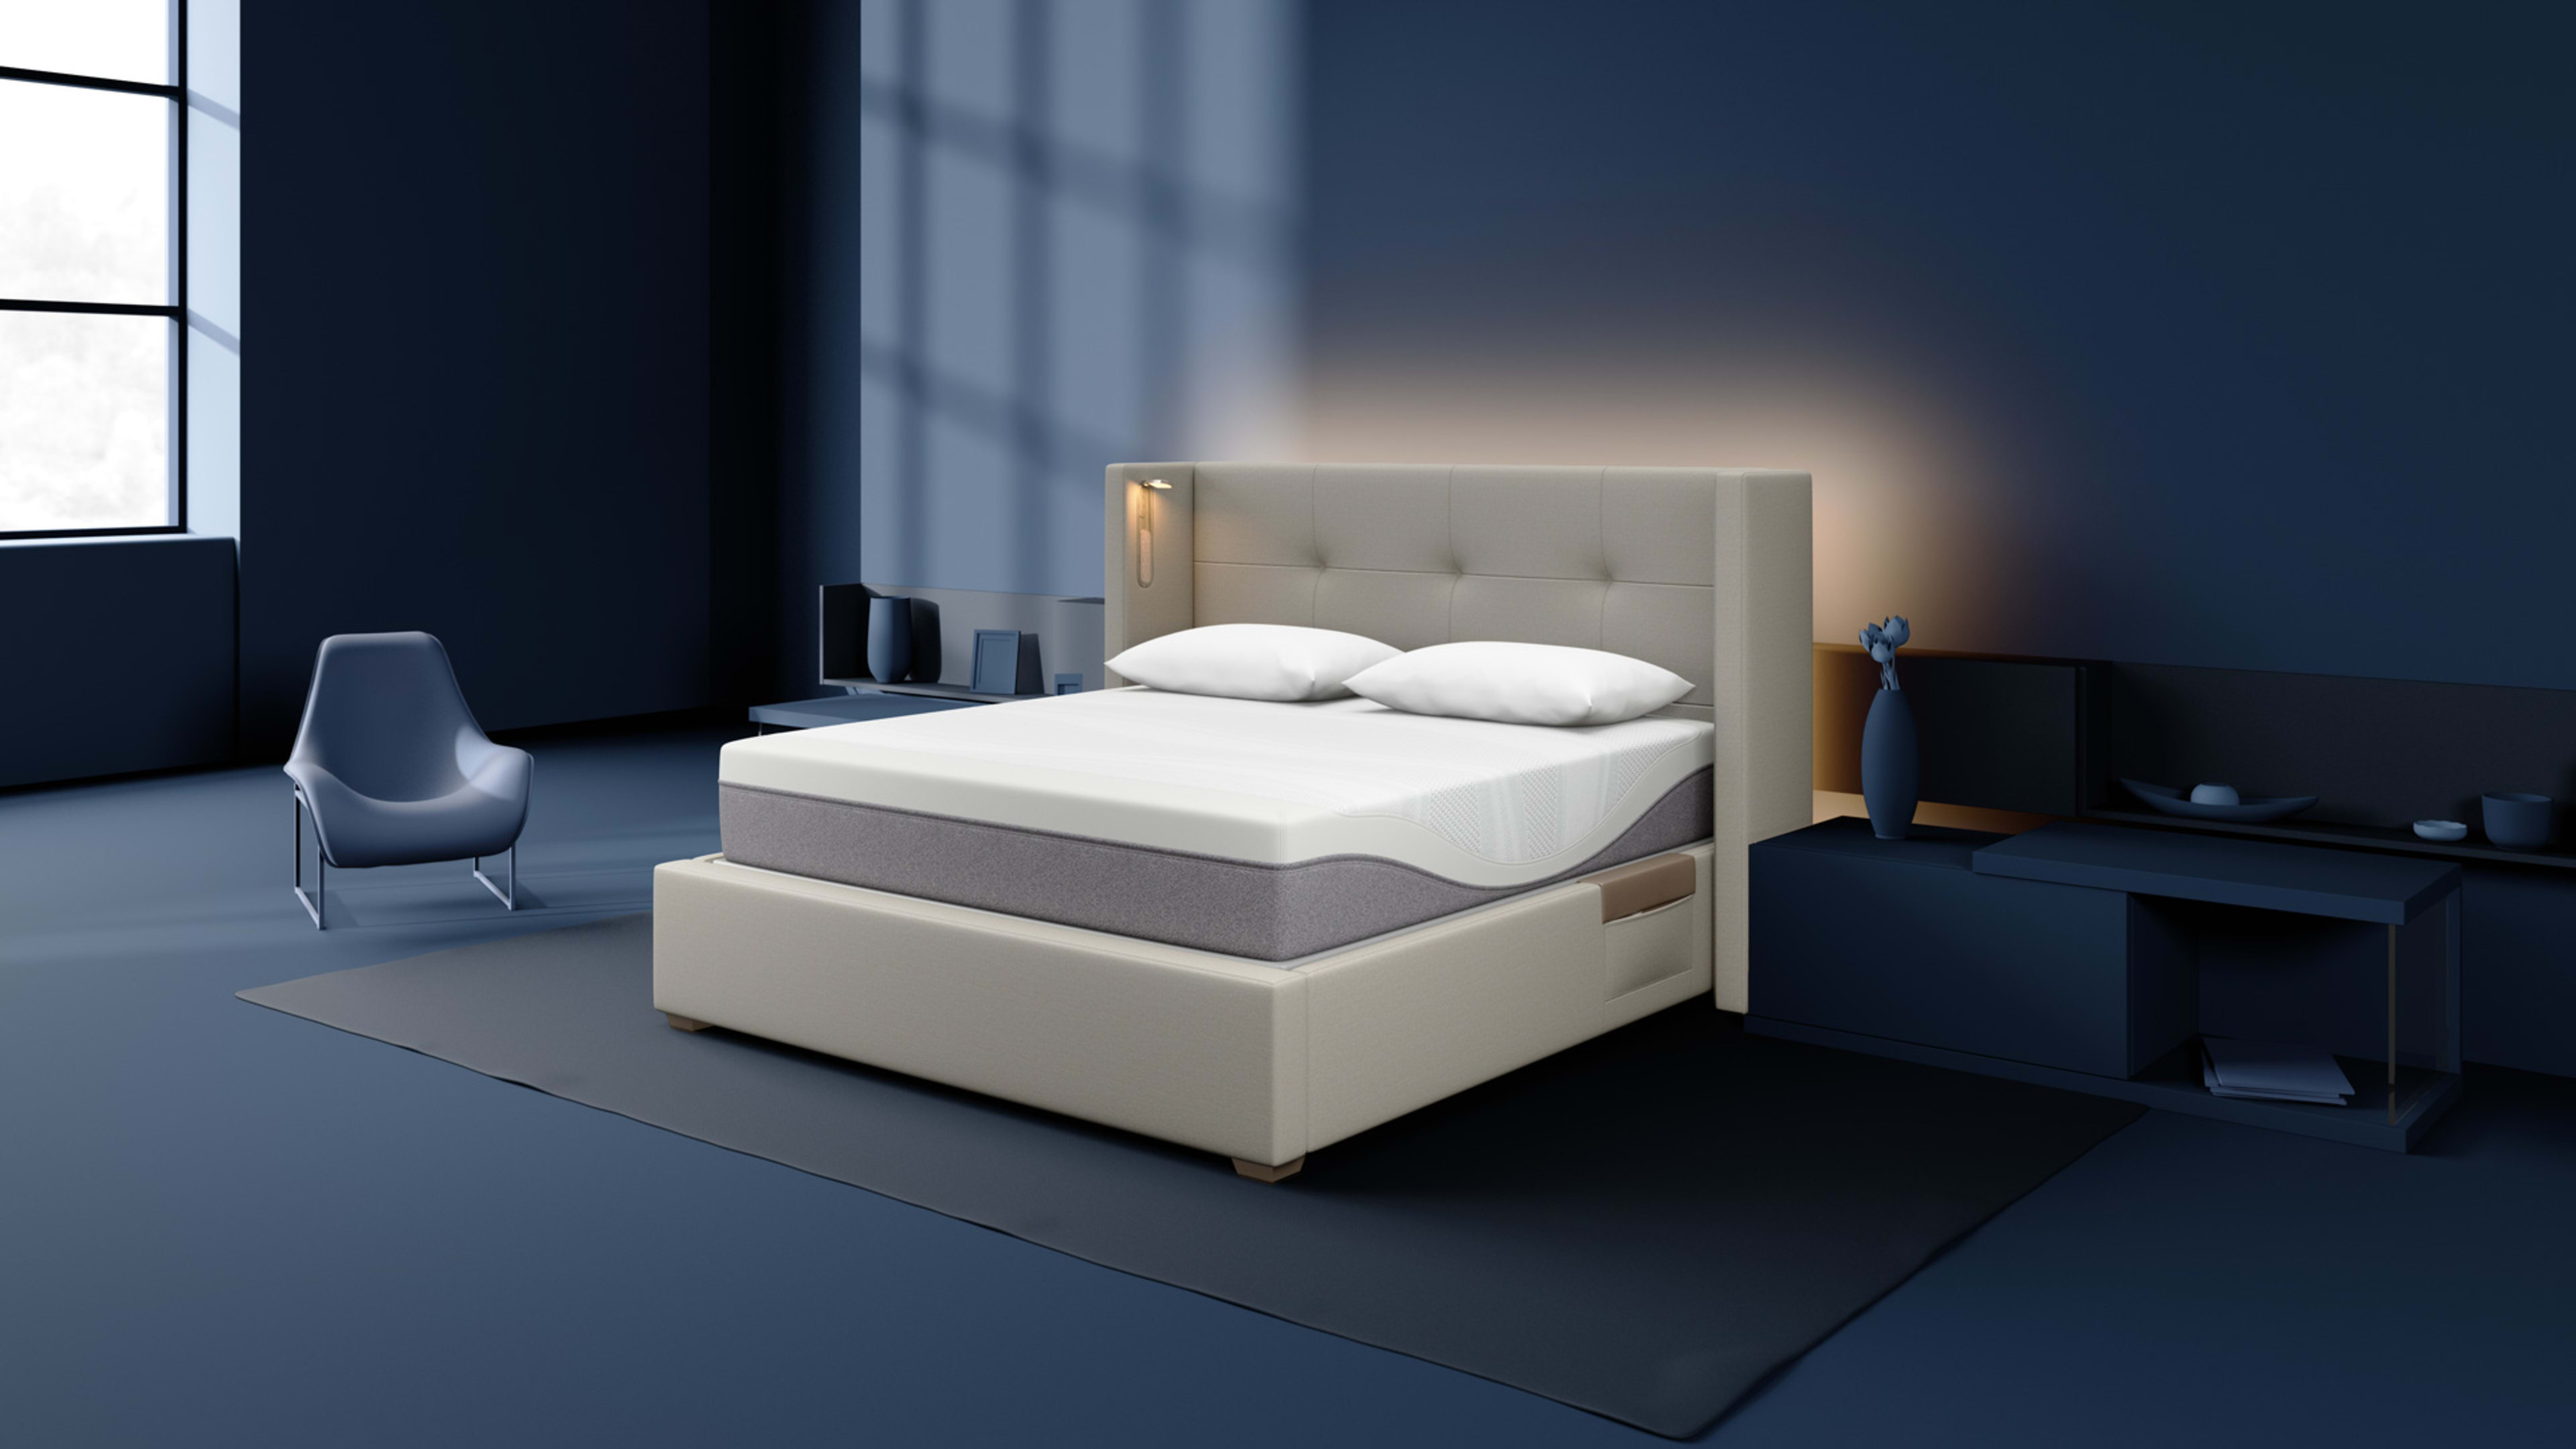 This legacy mattress brand’s smart beds are its secret weapon in the sleep wars